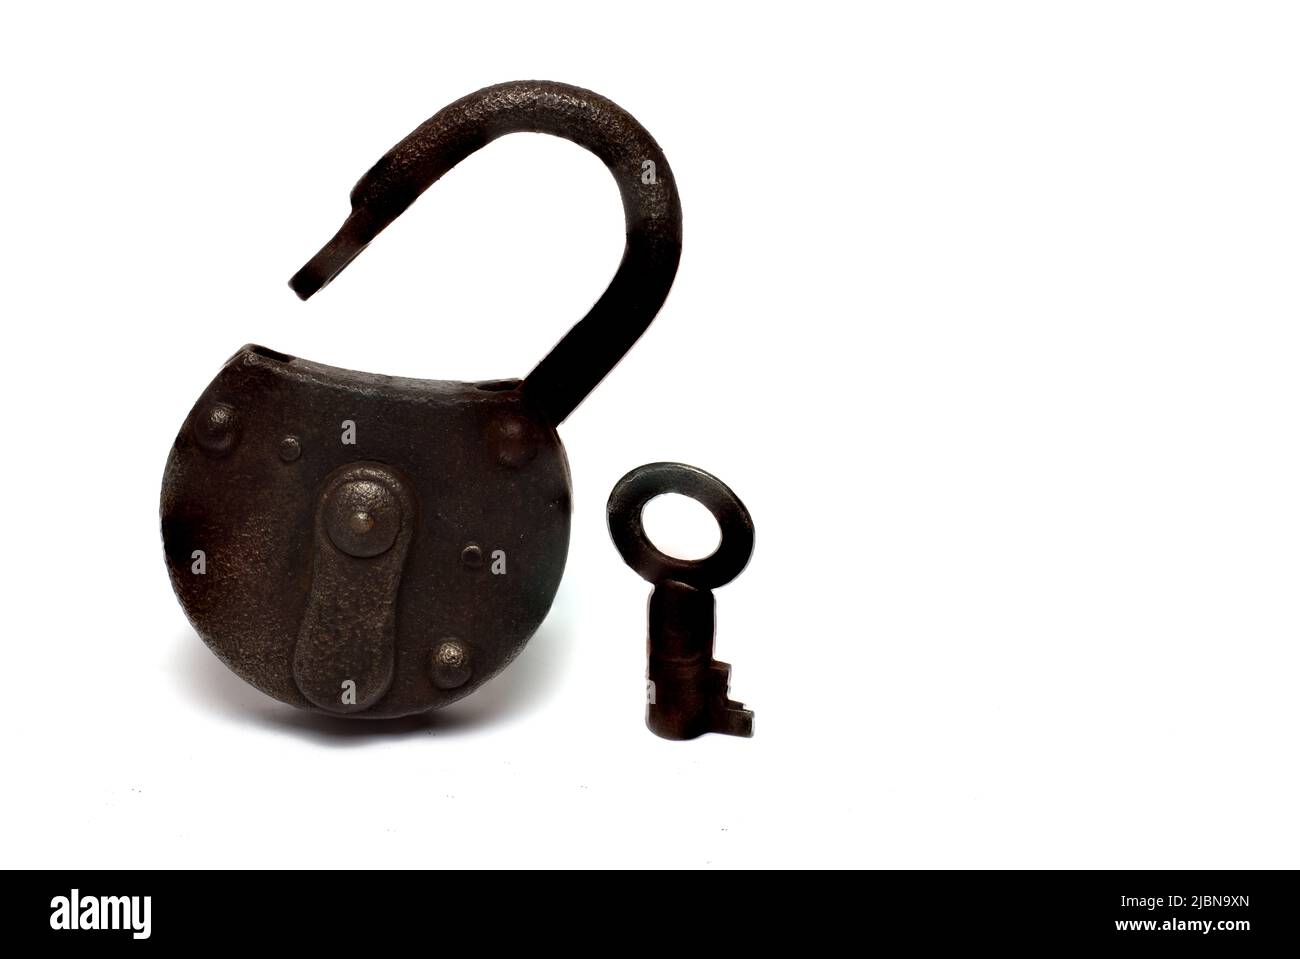 Close up of rusty old shackle lock with open shackle and key next to it on white background Stock Photo